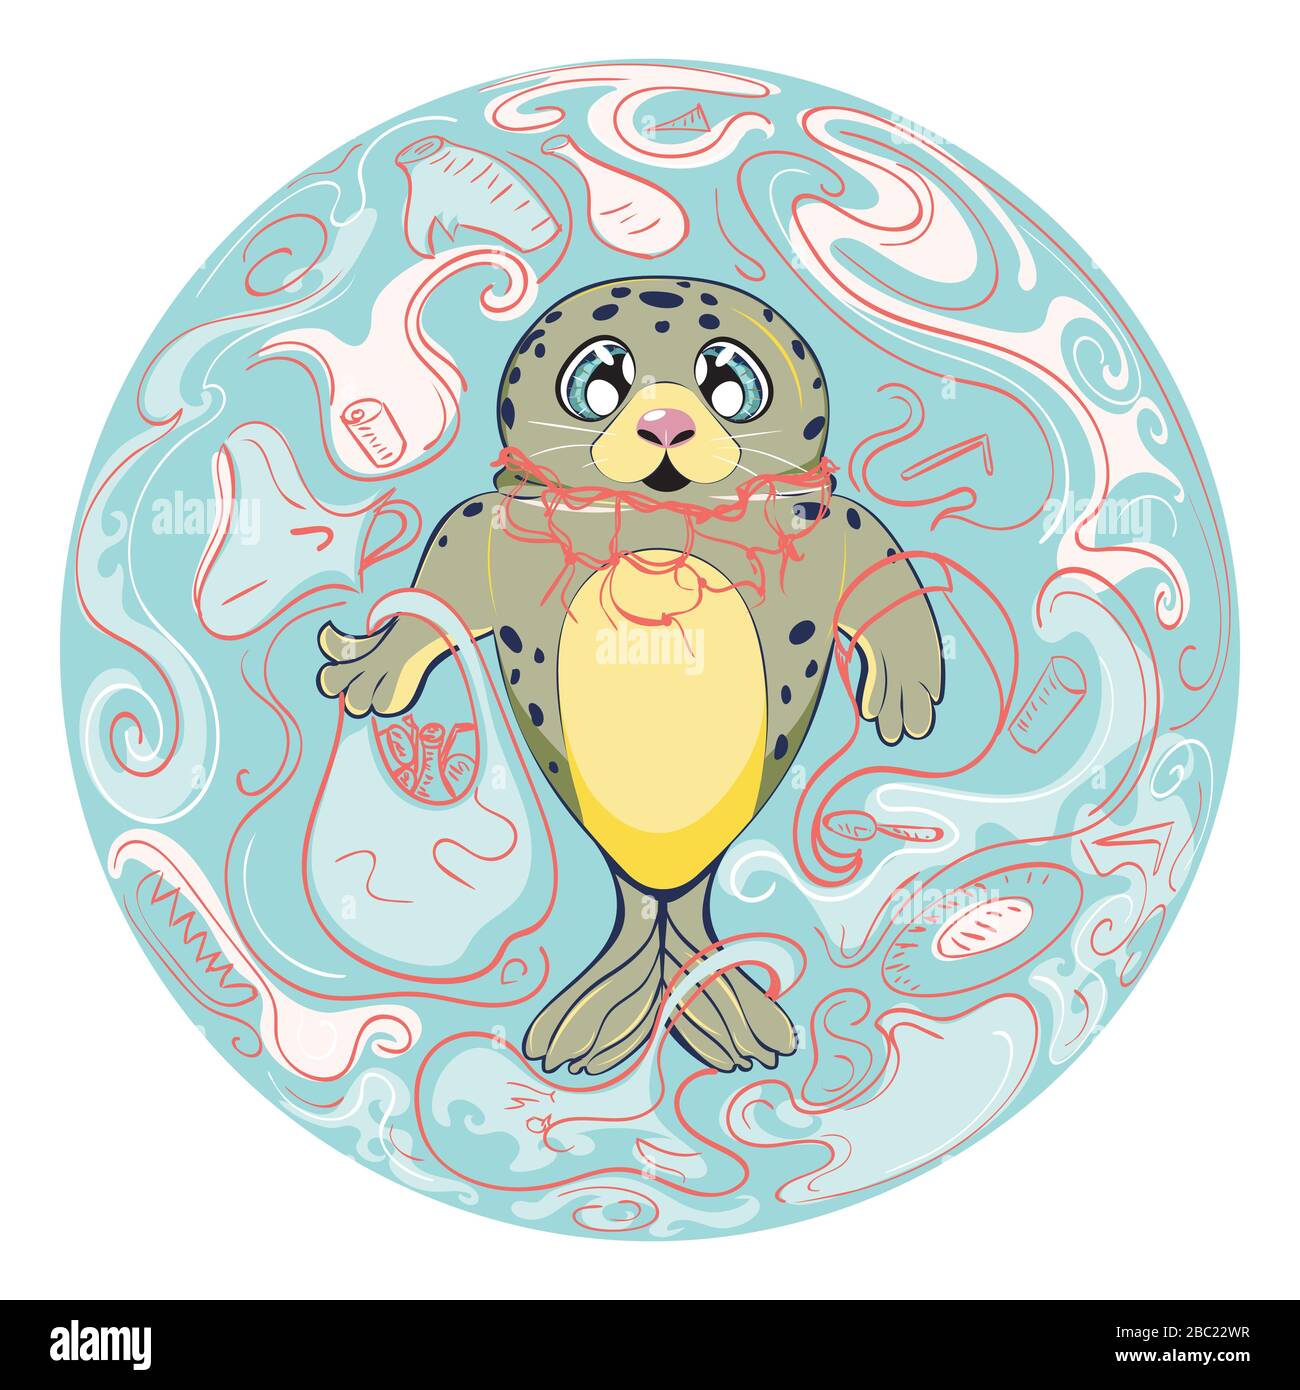 Cartoon kawaii seal with net around its neck surrounded by plastic waste, ocean pollution themed design. Stock Vector